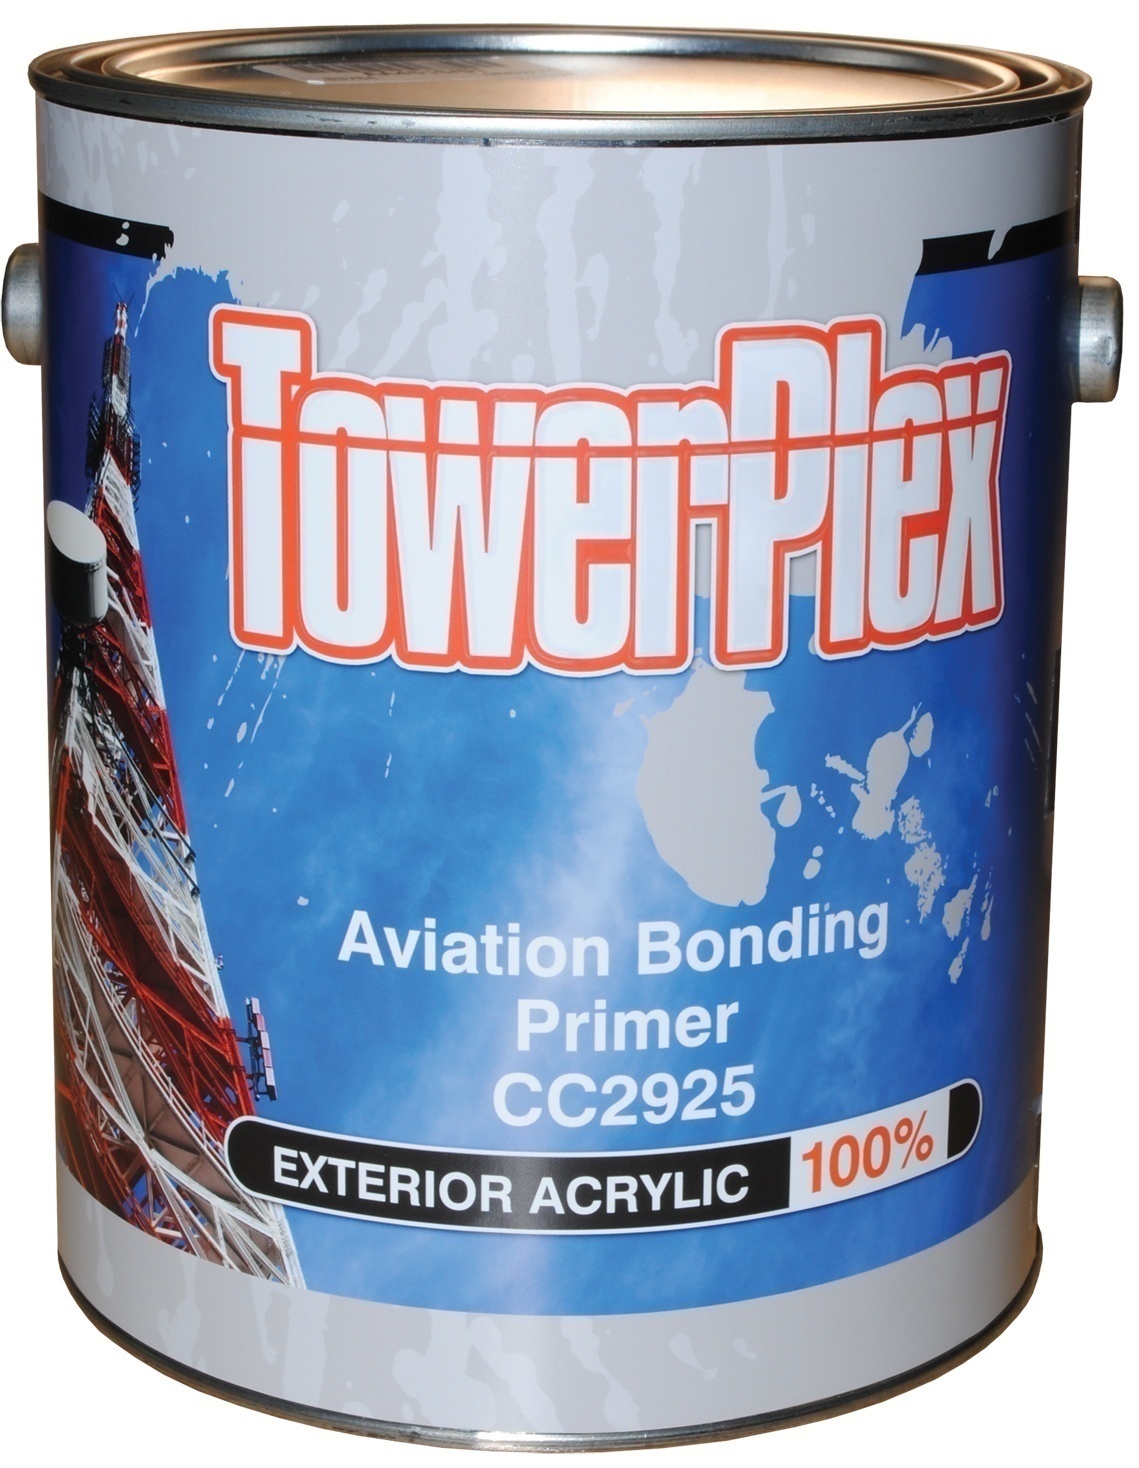 CC2925A TowerPlex Acrylic Bonding Primer from Columbia Safety